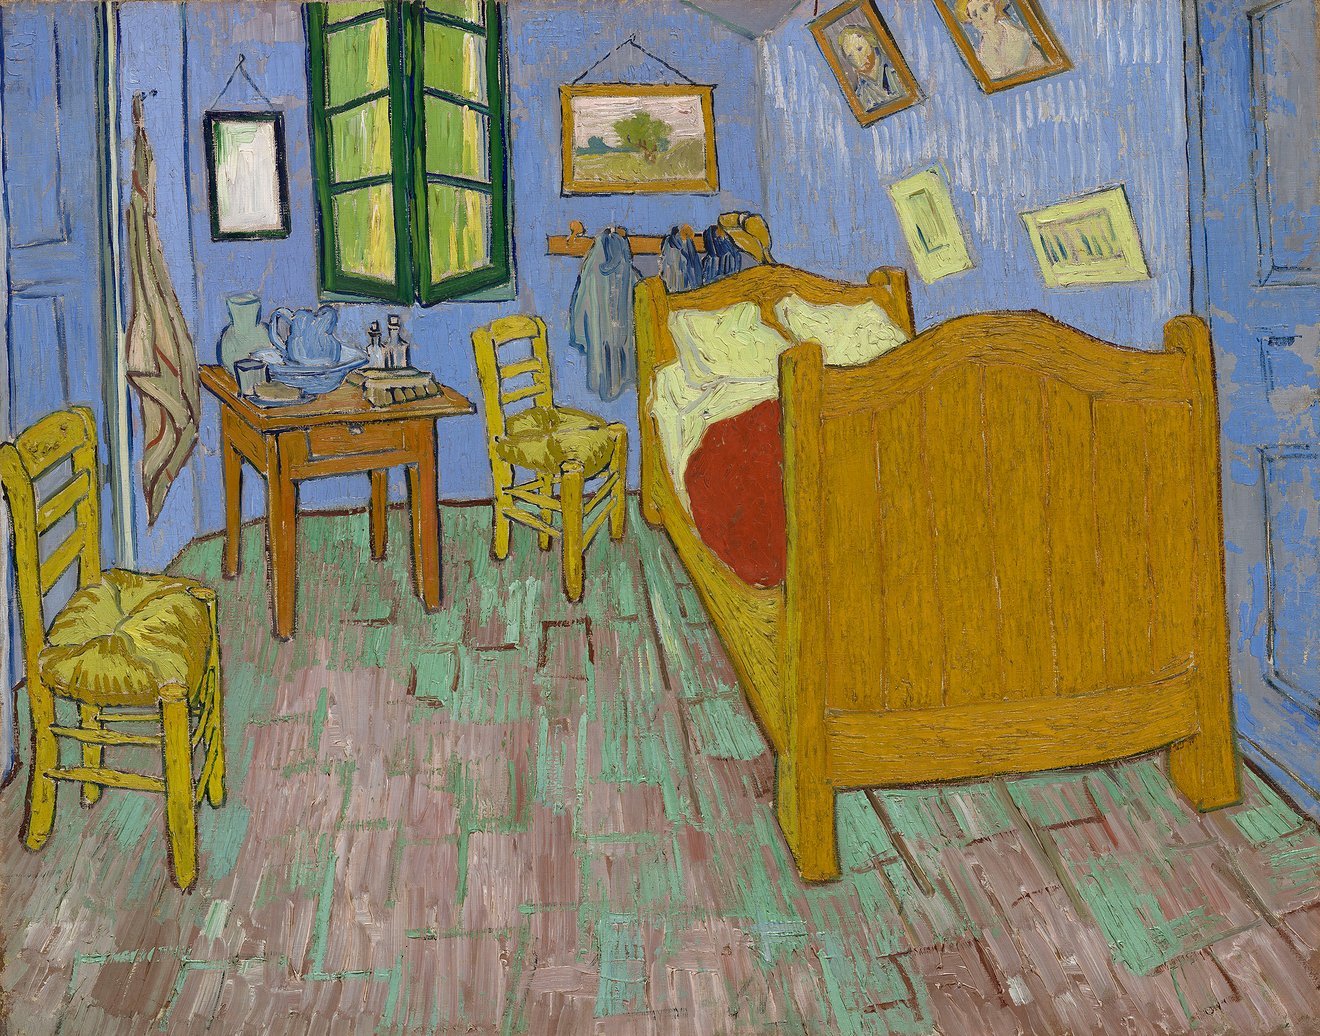 Vincent Van Gogh <i>The Bedroom</i> (1889). Courtesy of the Art Institute of Chicago.